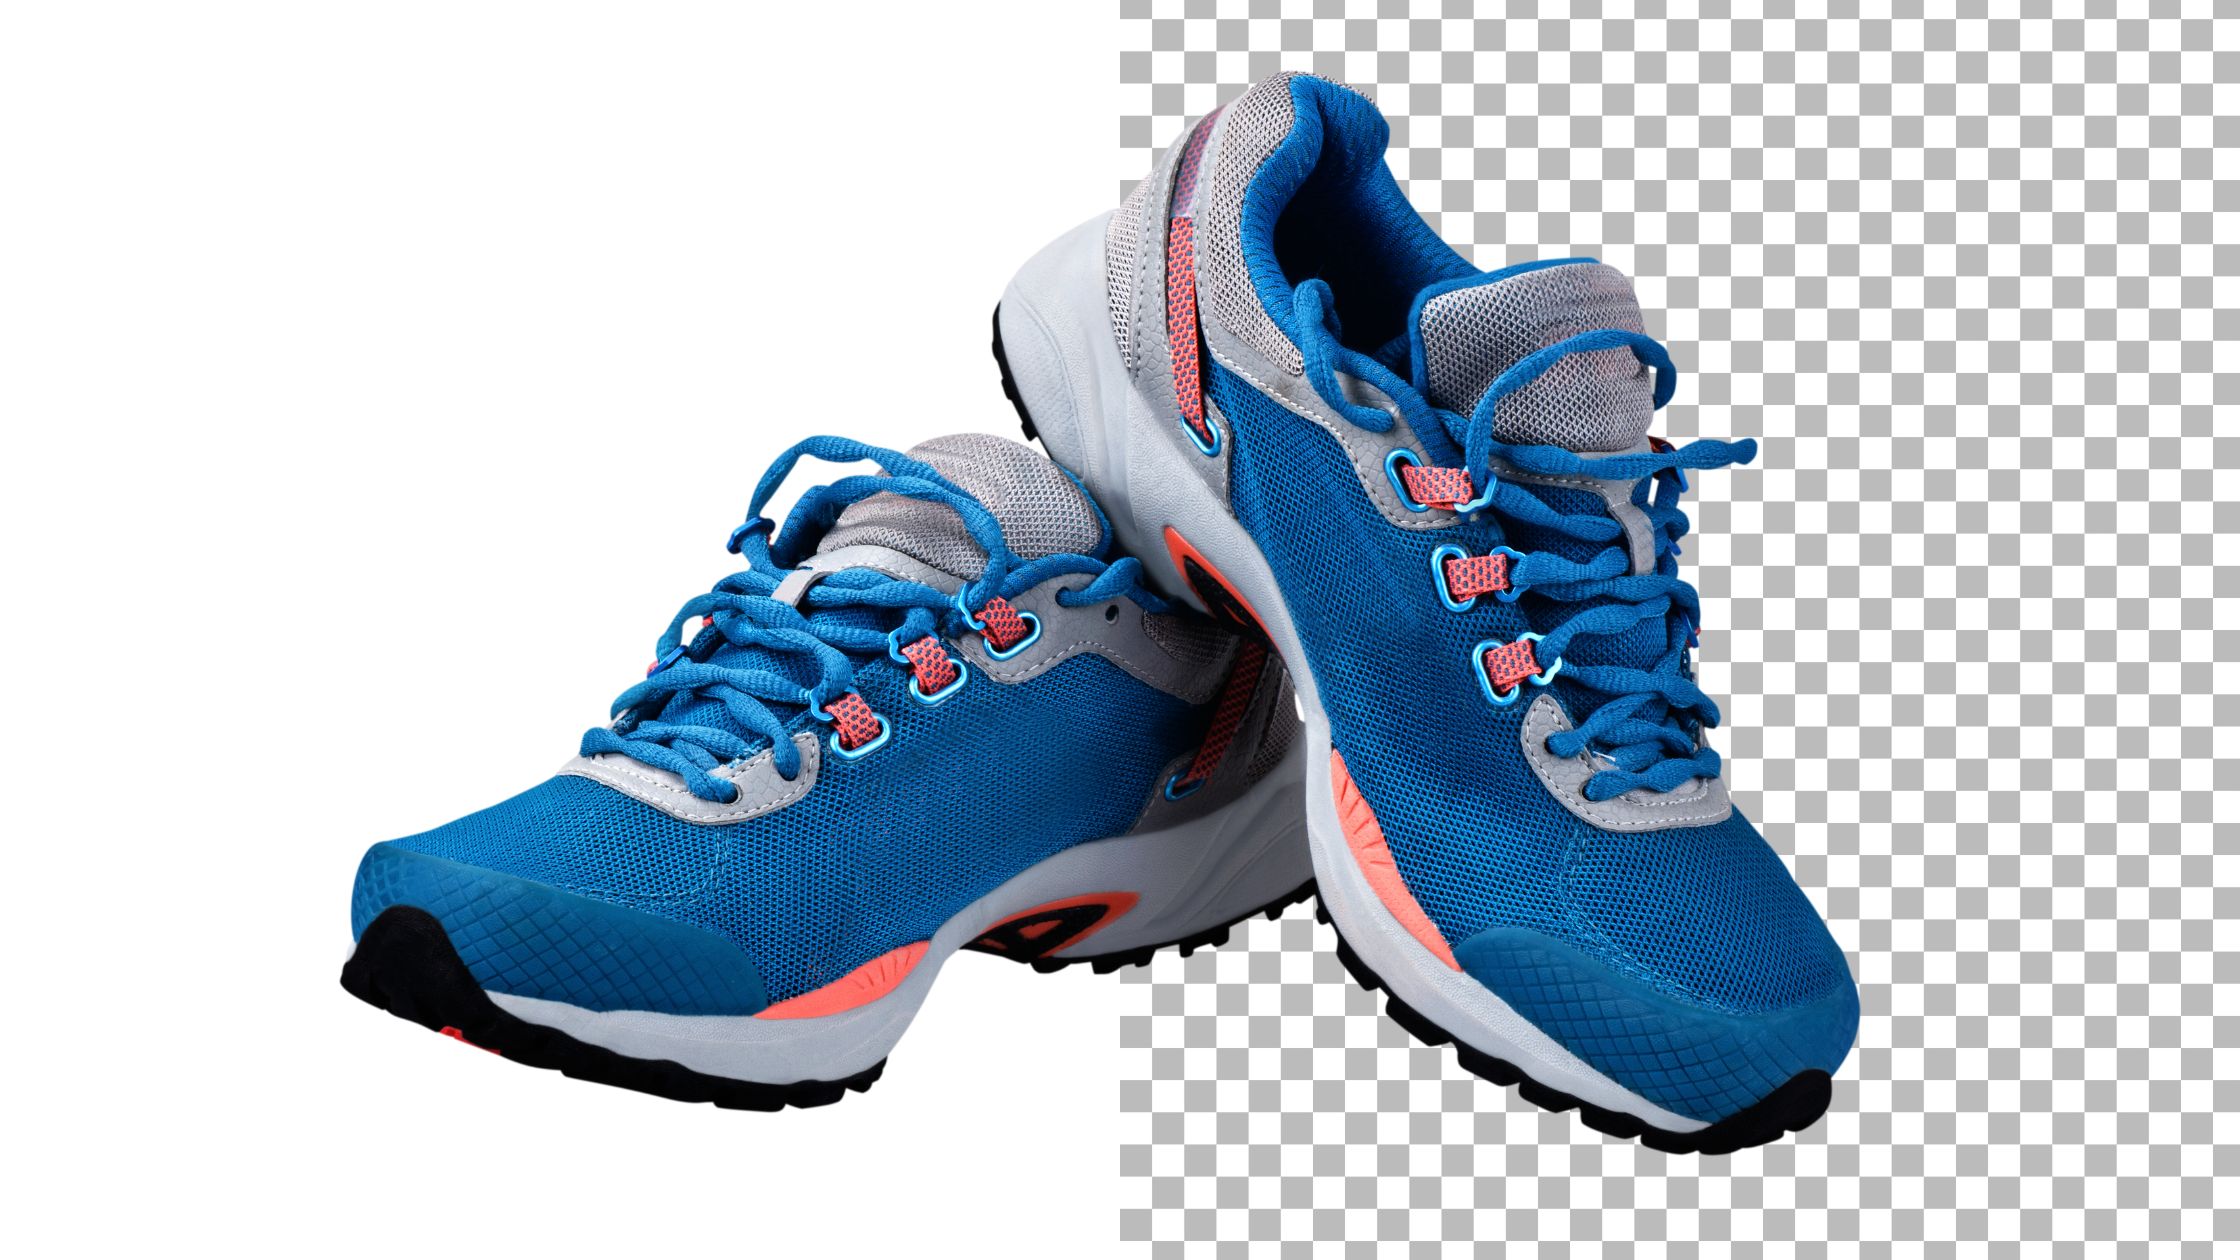 importance of clipping path